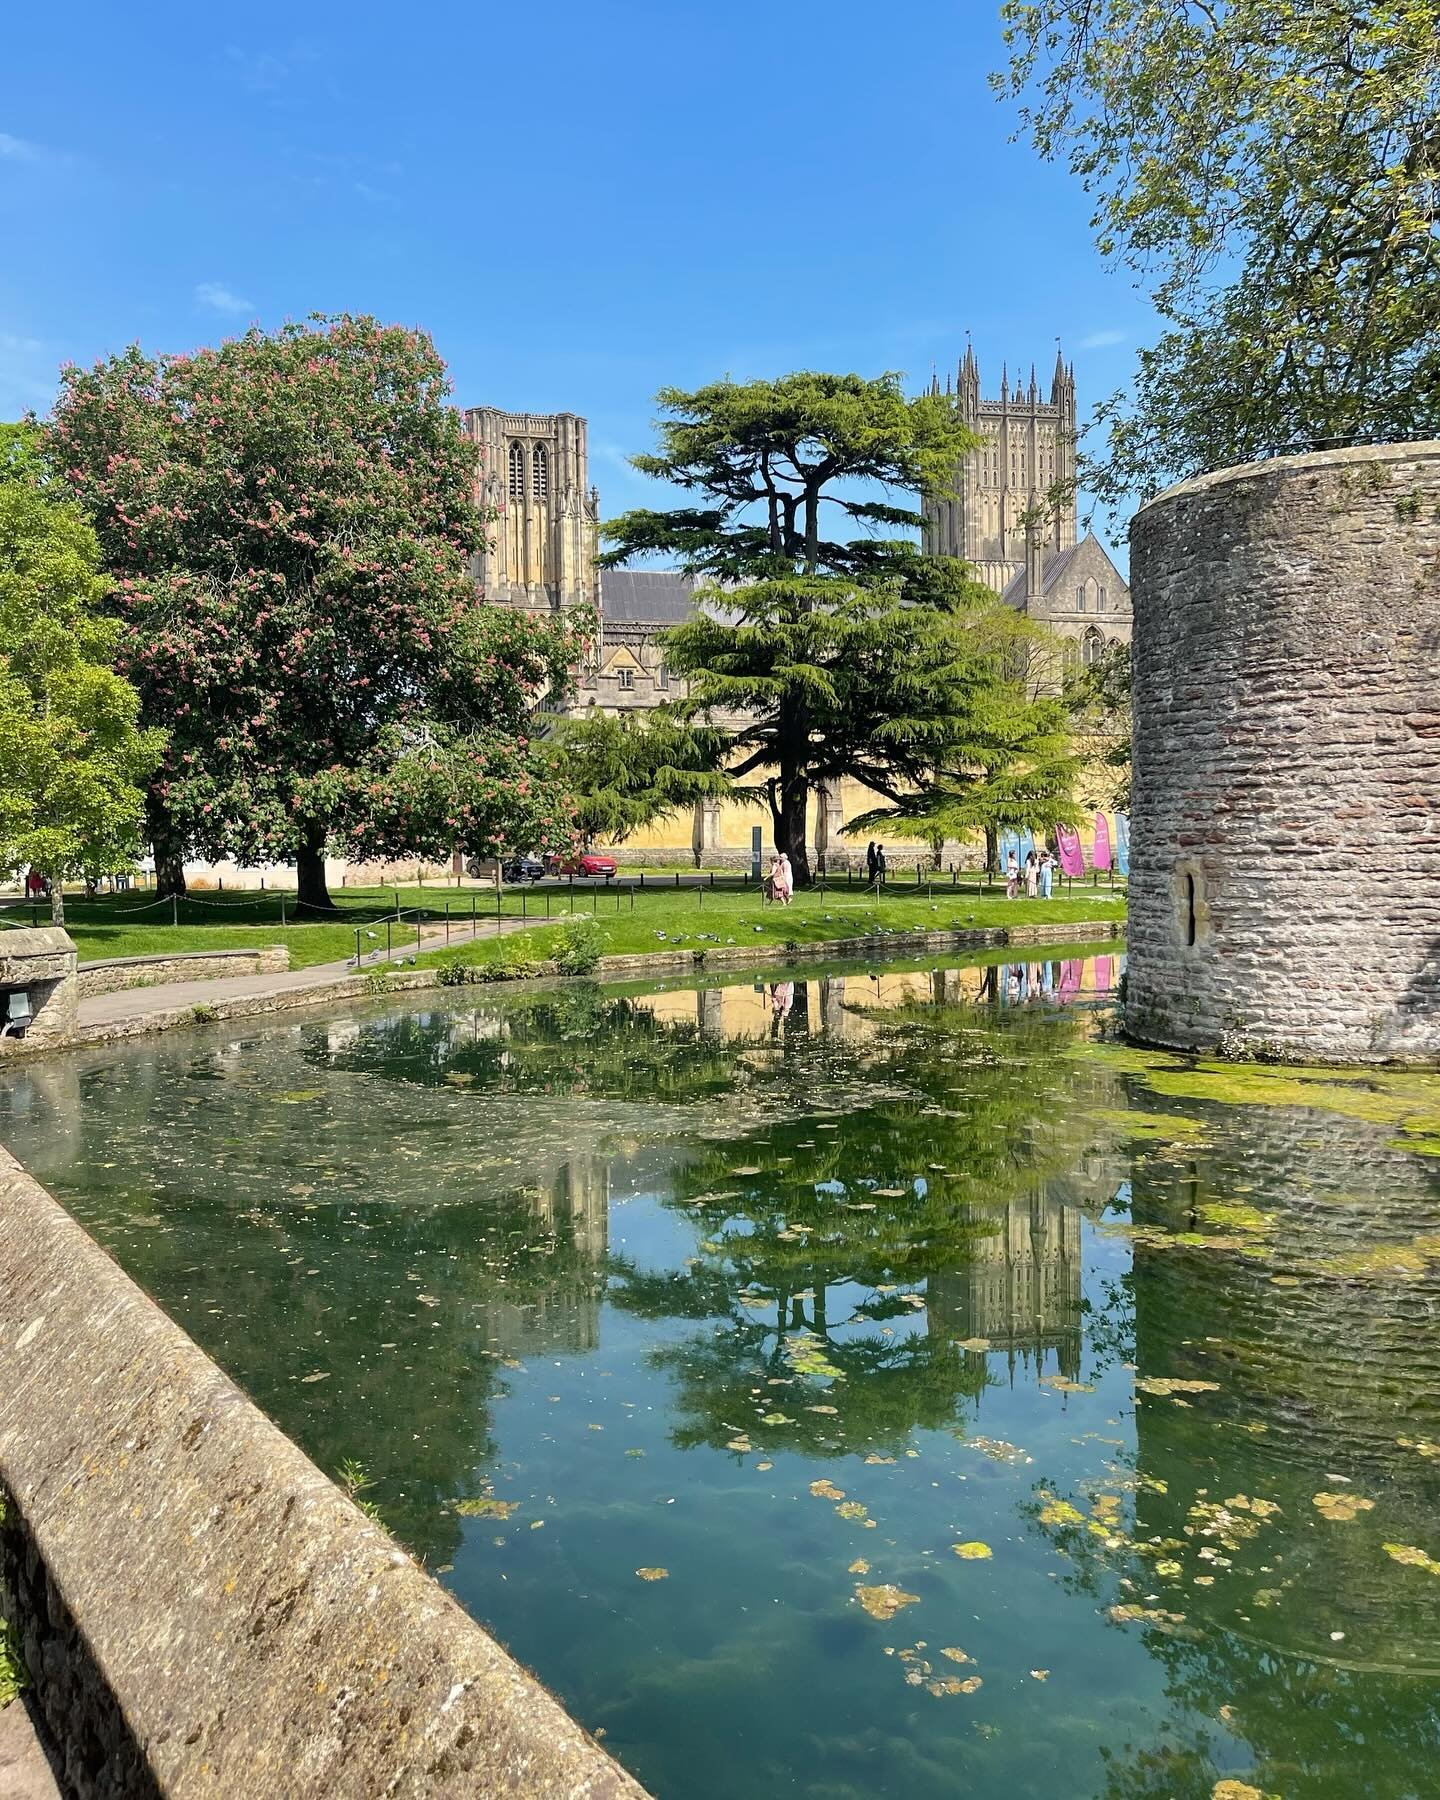 Beautiful day in sunny Somerset, perfect day for a walk and then pop into a local business for a light bite and cooling drink.

#supportlocal #sunnydays☀️